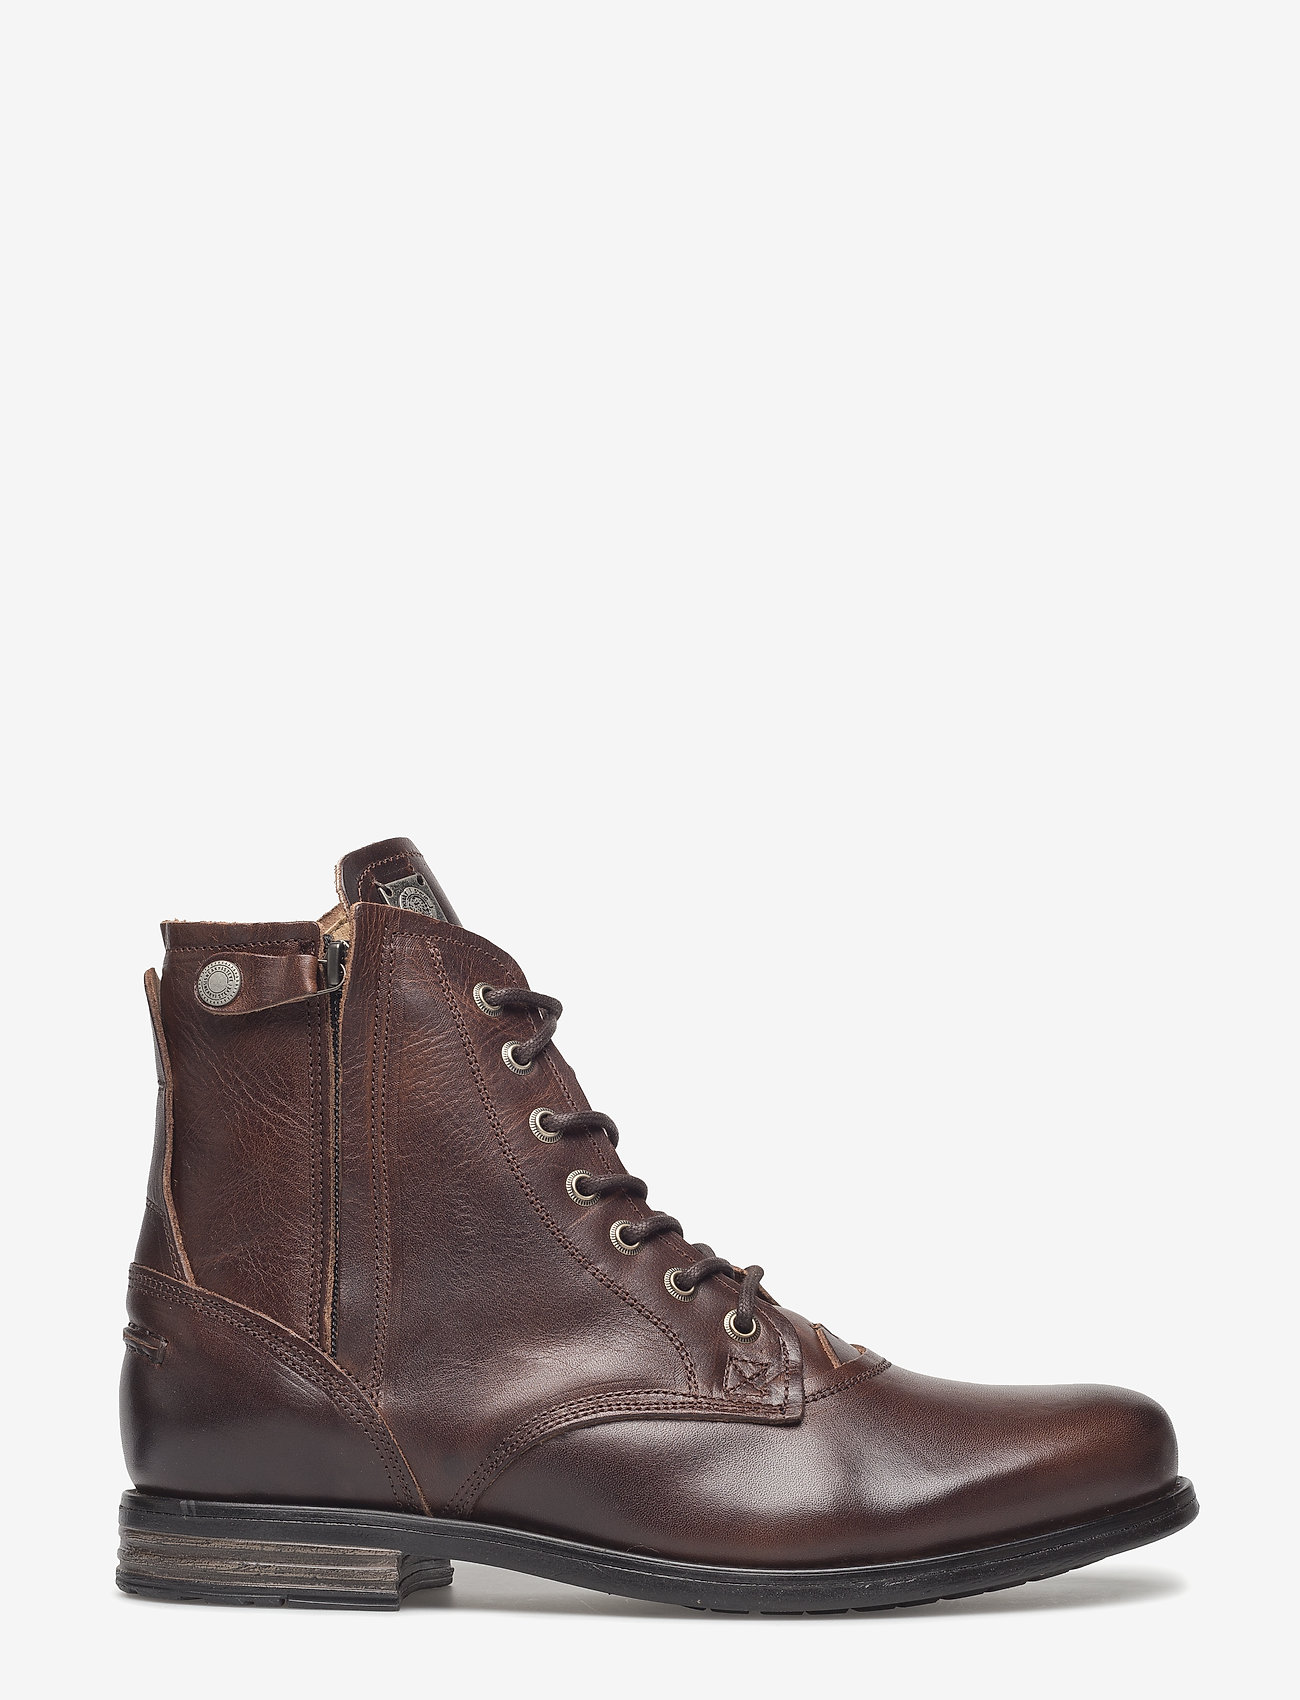 Sneaky Steve - Kingdom Leather Shoe - lace ups - brown - 1